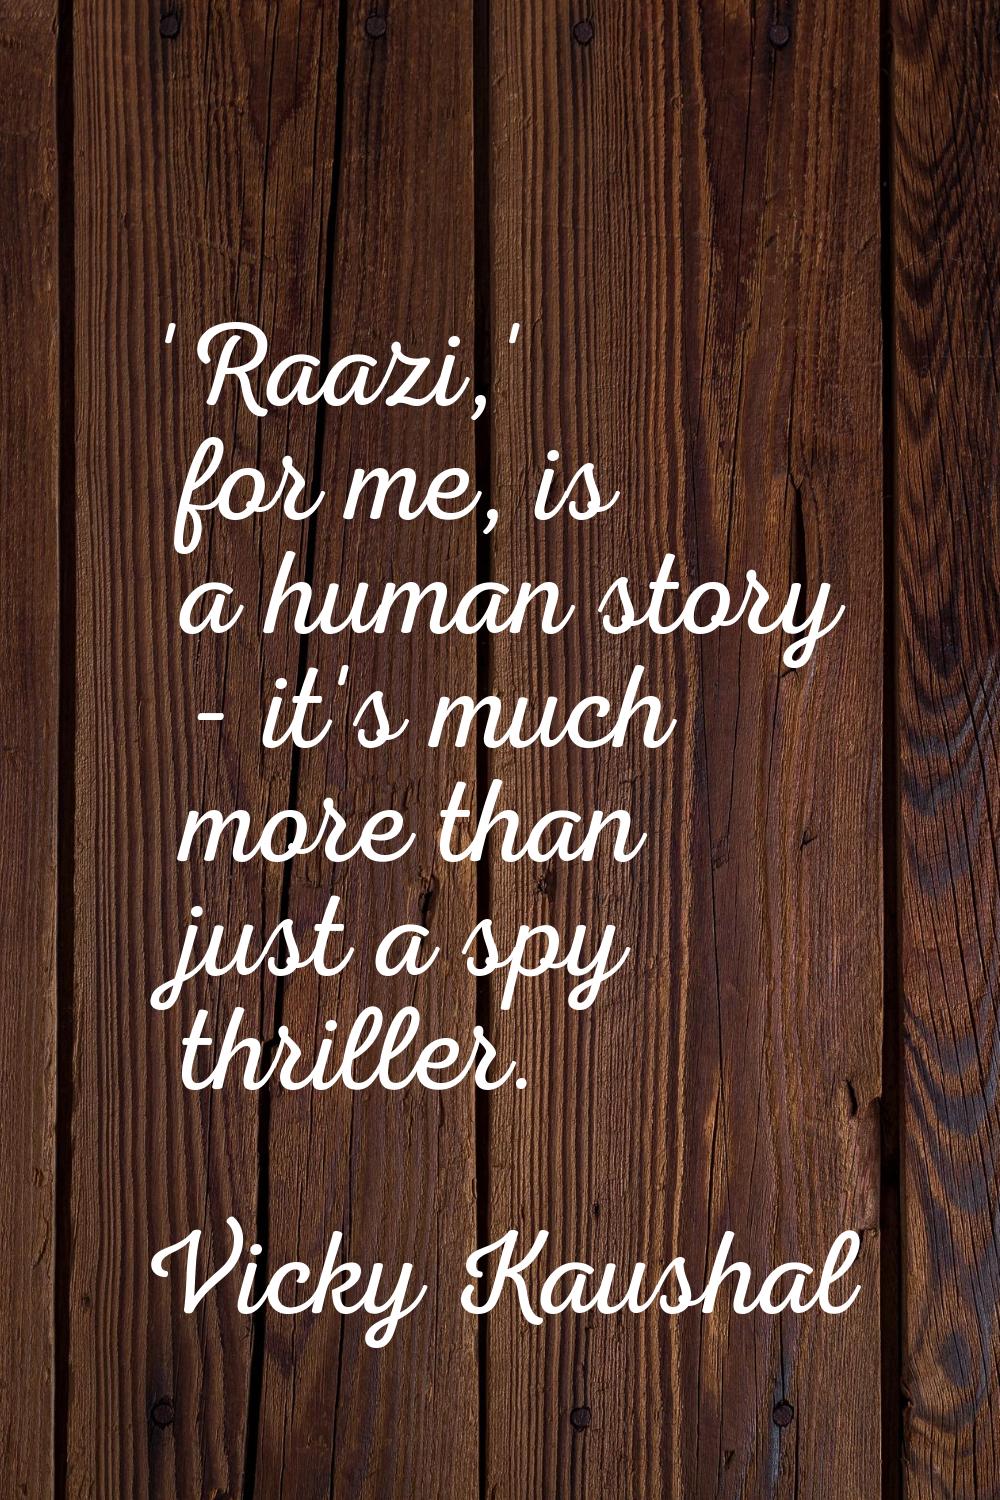 'Raazi,' for me, is a human story - it's much more than just a spy thriller.